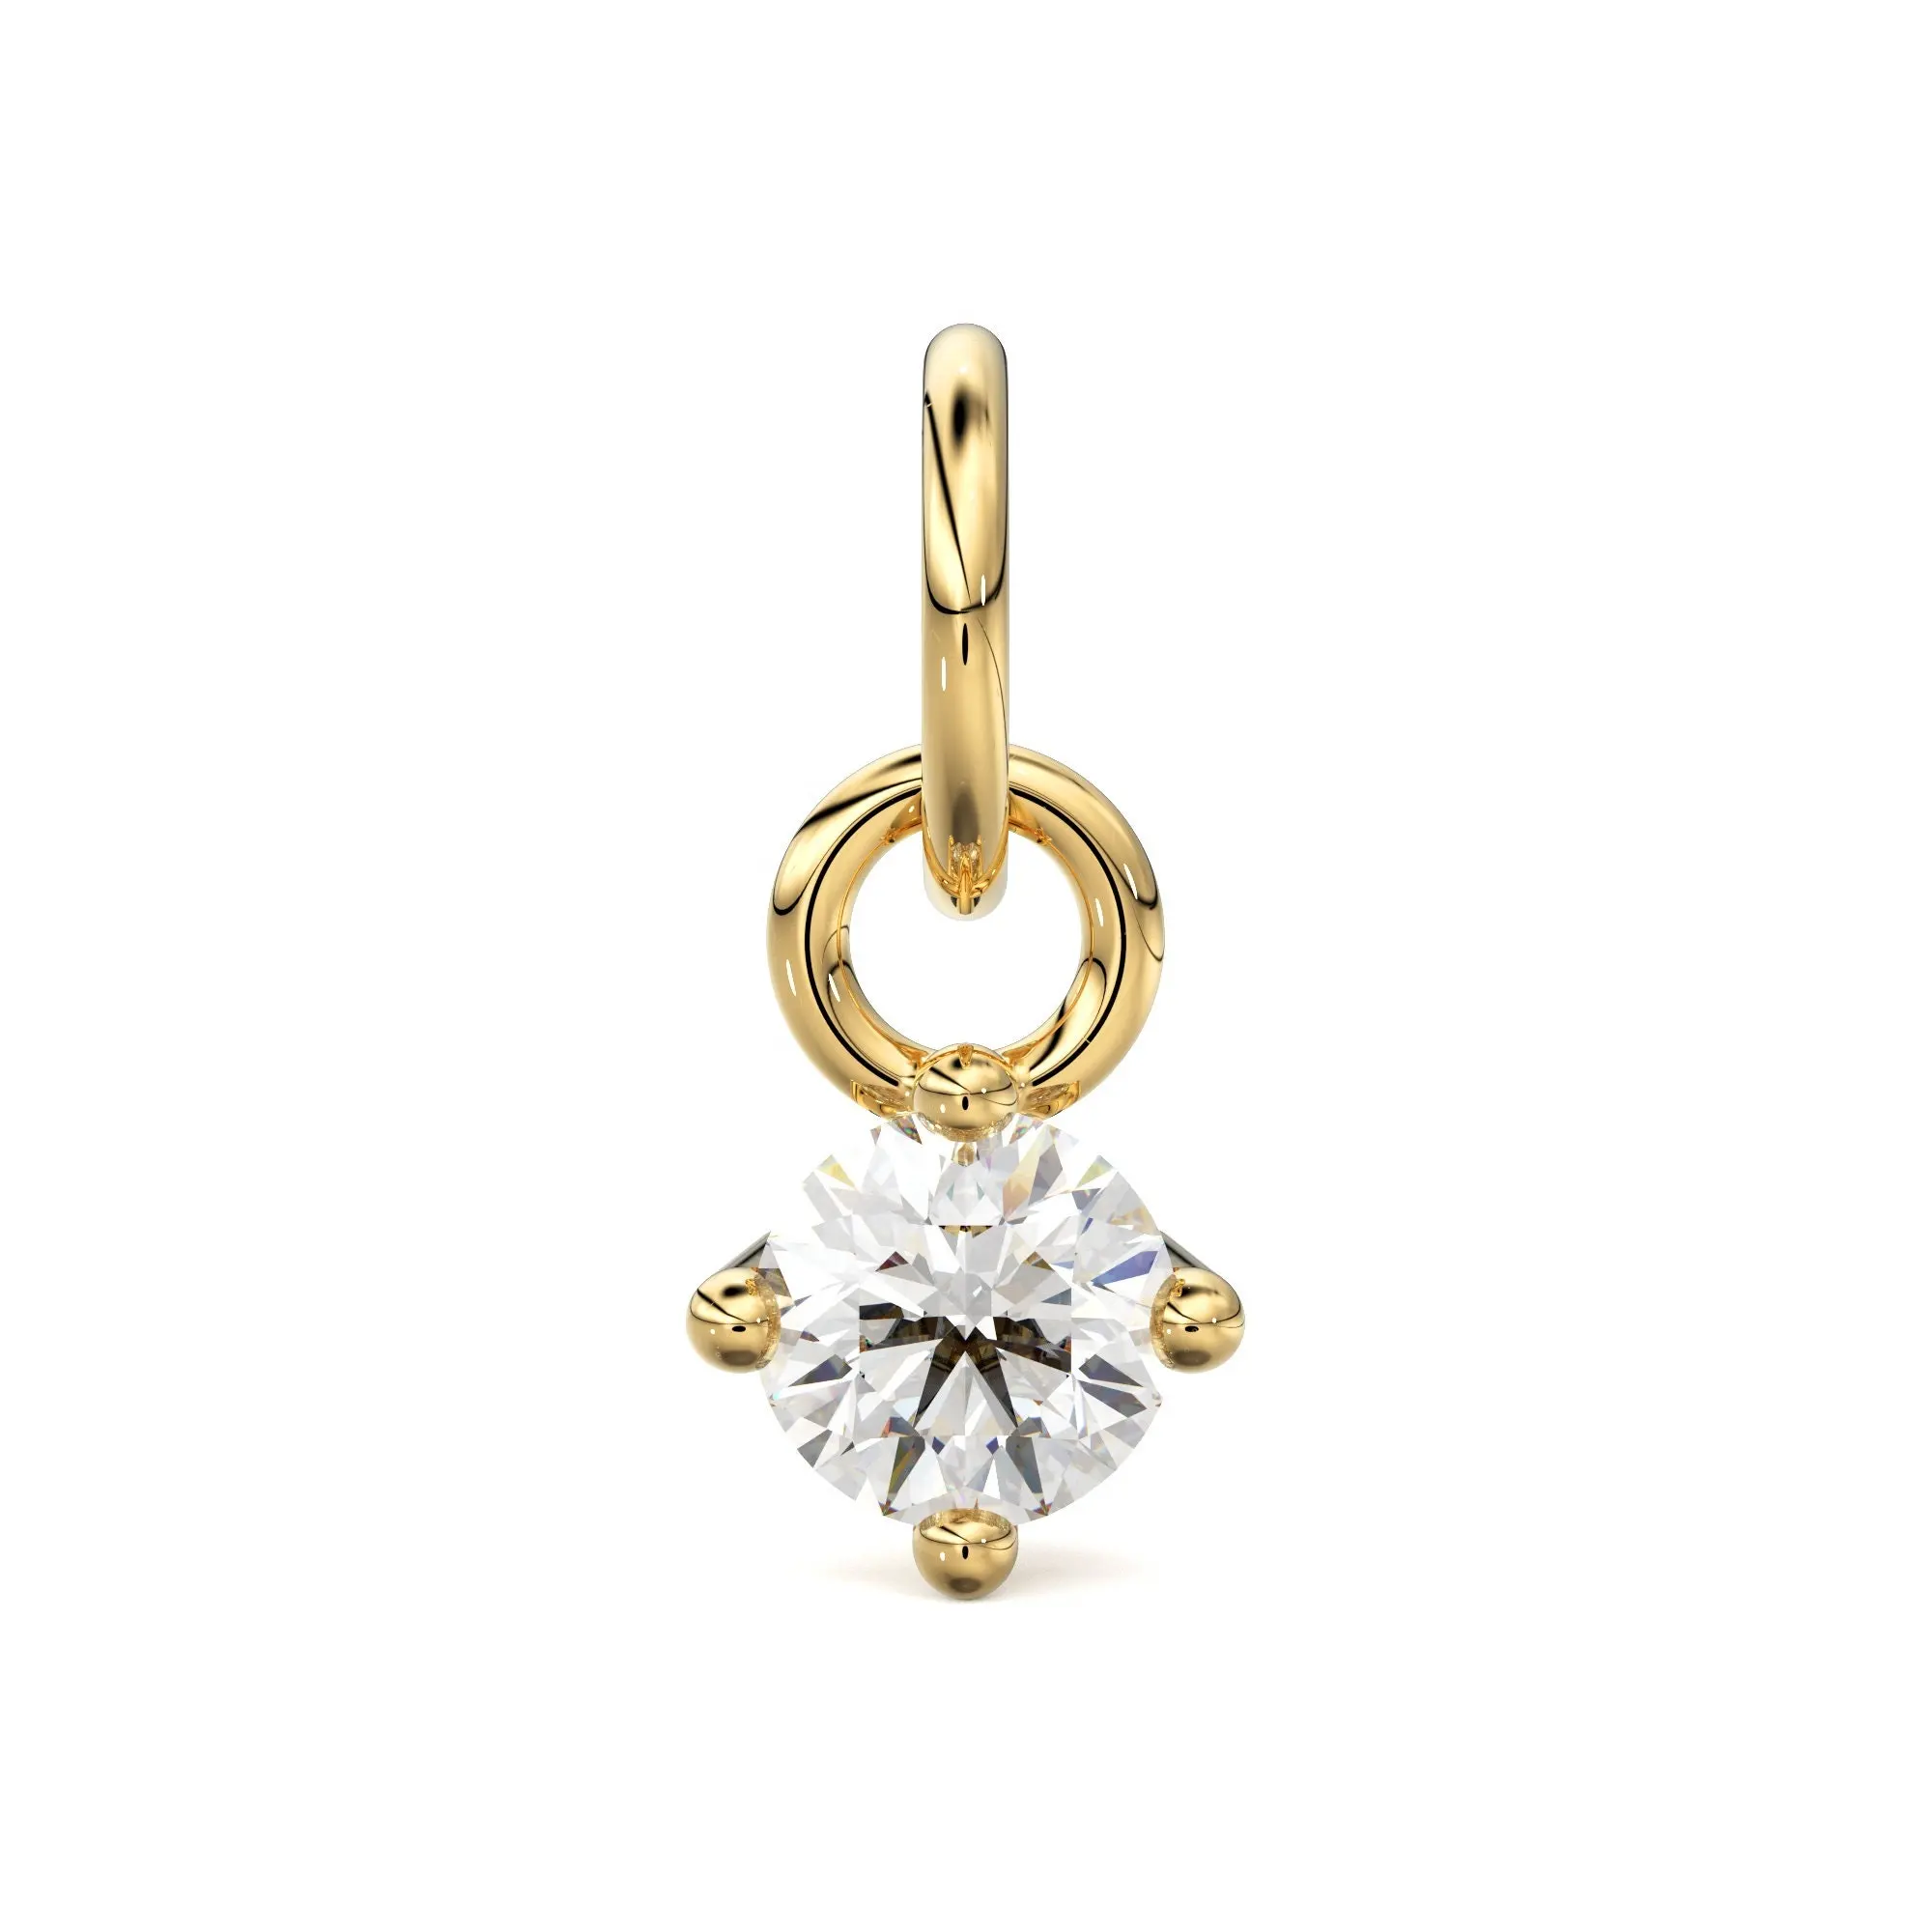 Round Solitaire Diamond 14k 18k Solid Gold Charm Pendant Jewelry Making Essential Finding can be used as pendant or earring